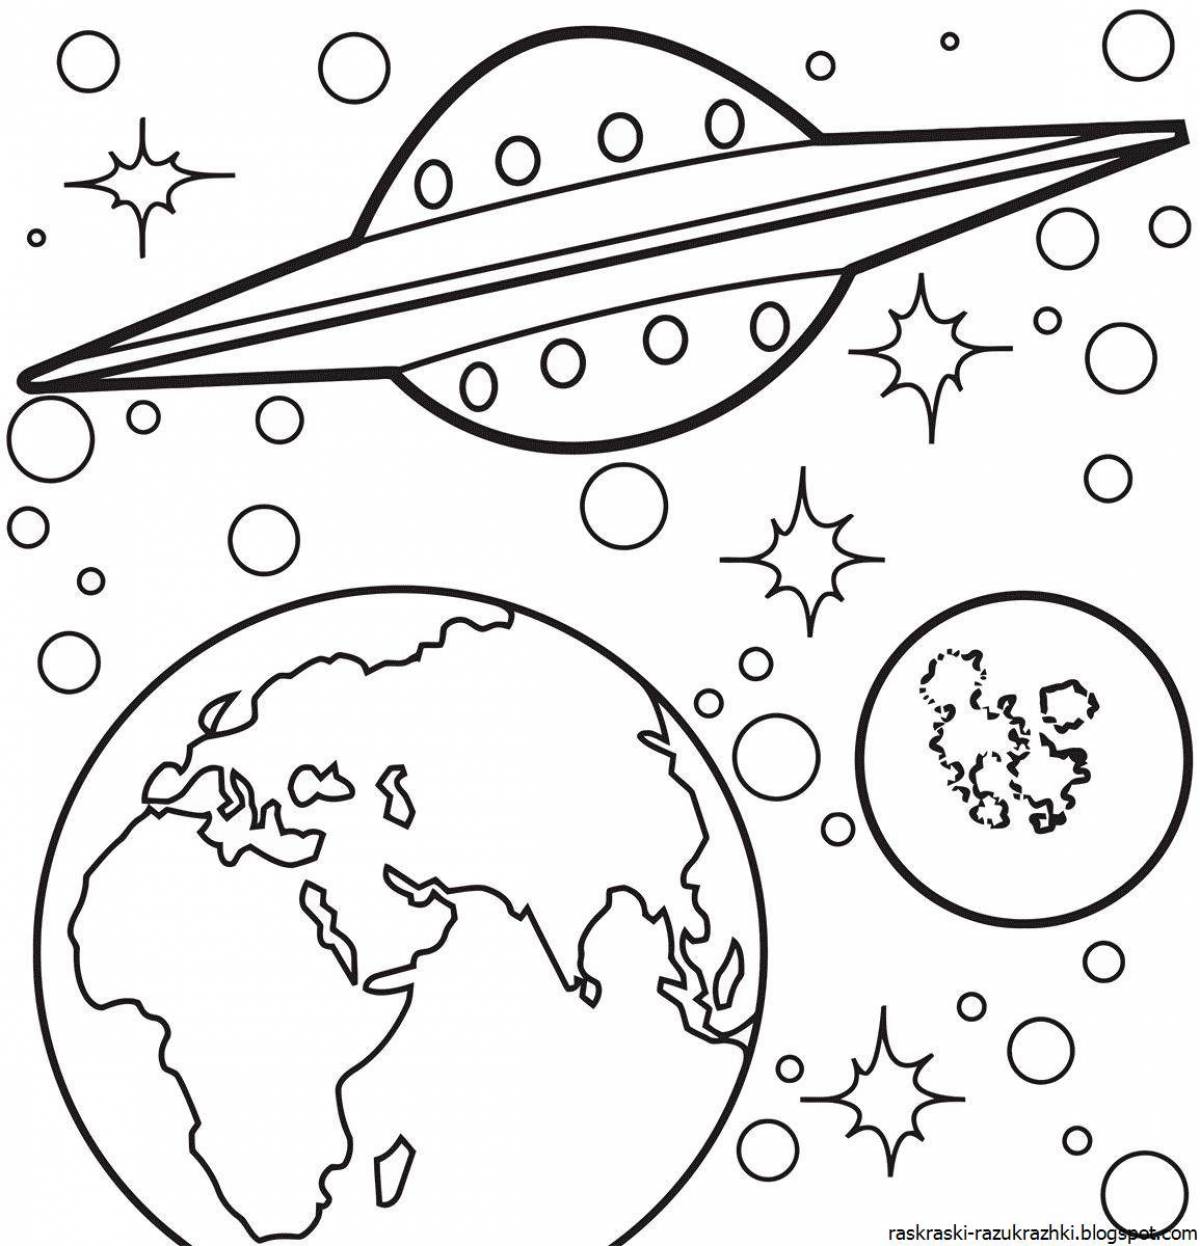 Sublime space coloring book for kids